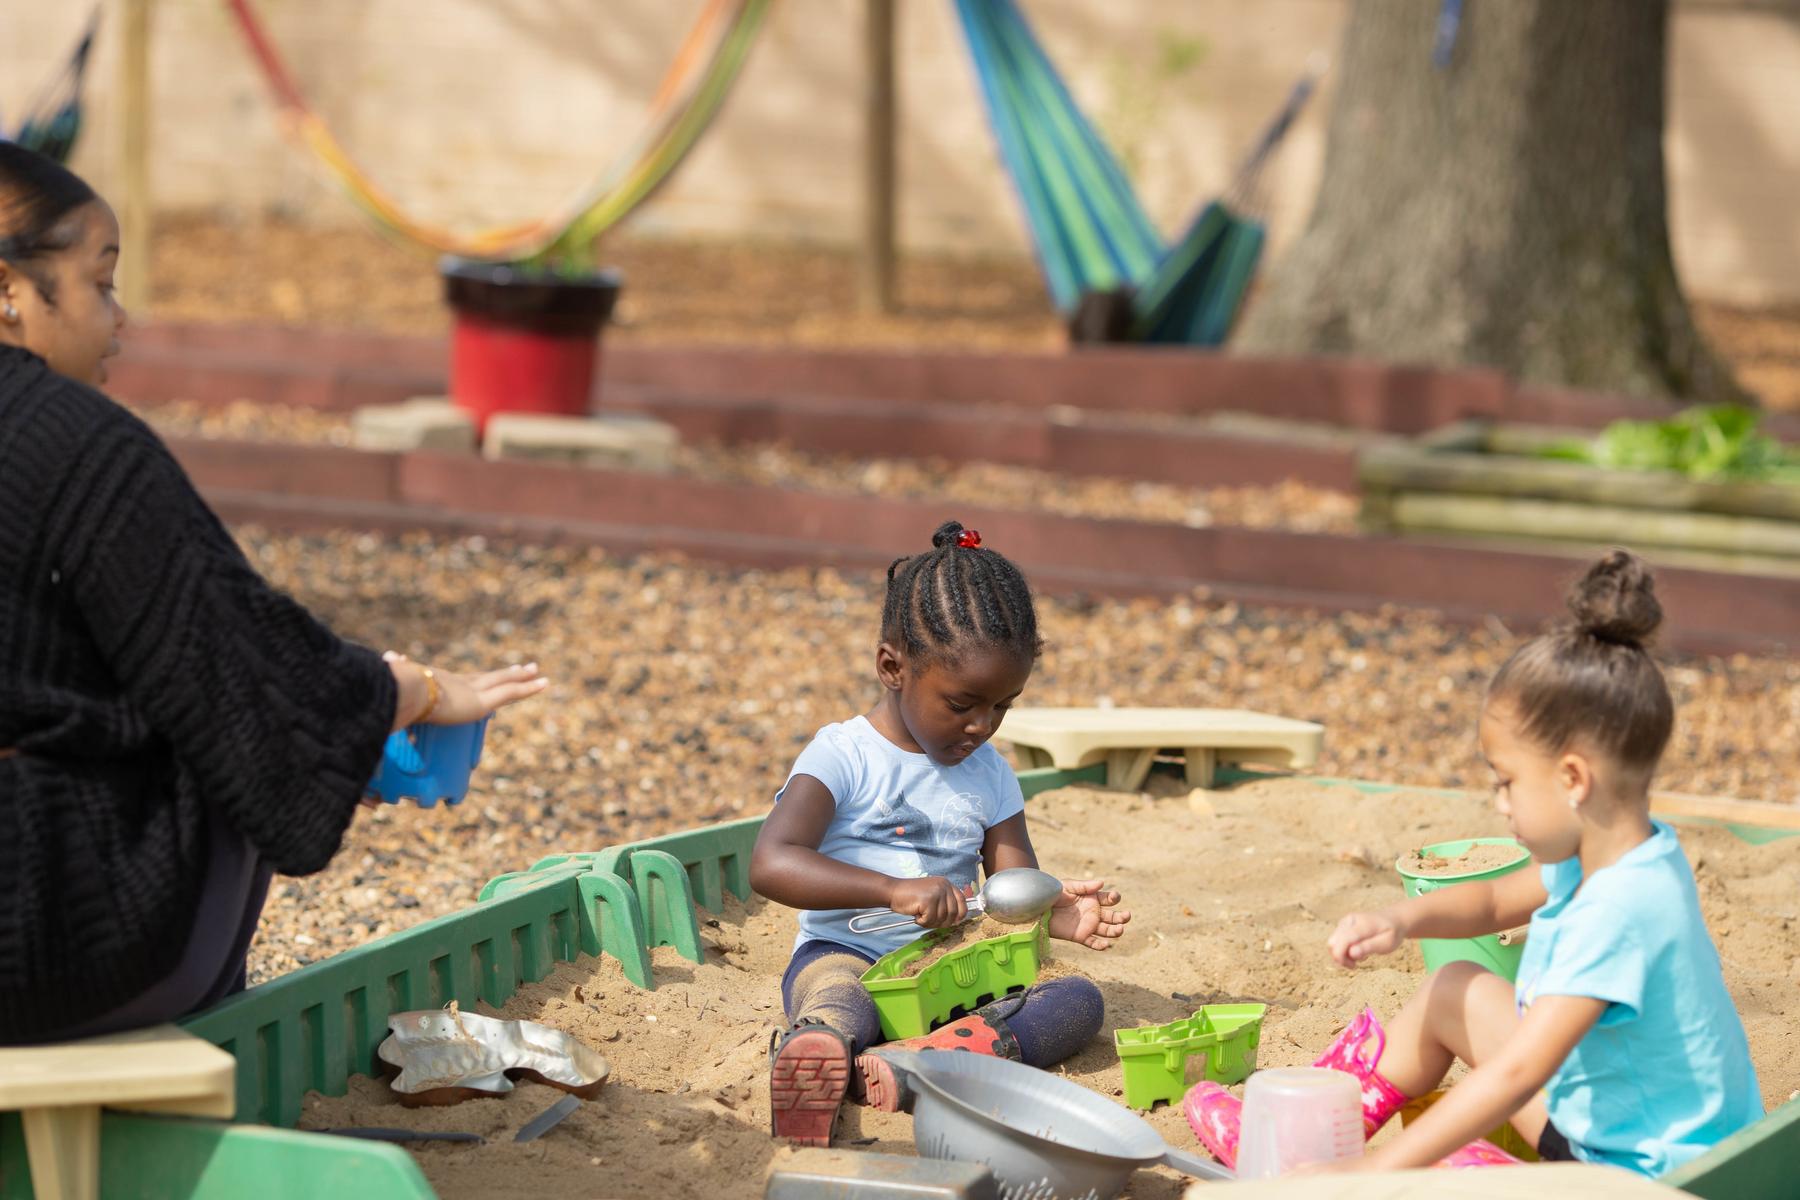 Children play in the sandbox at Little Govs Child Learning Center.